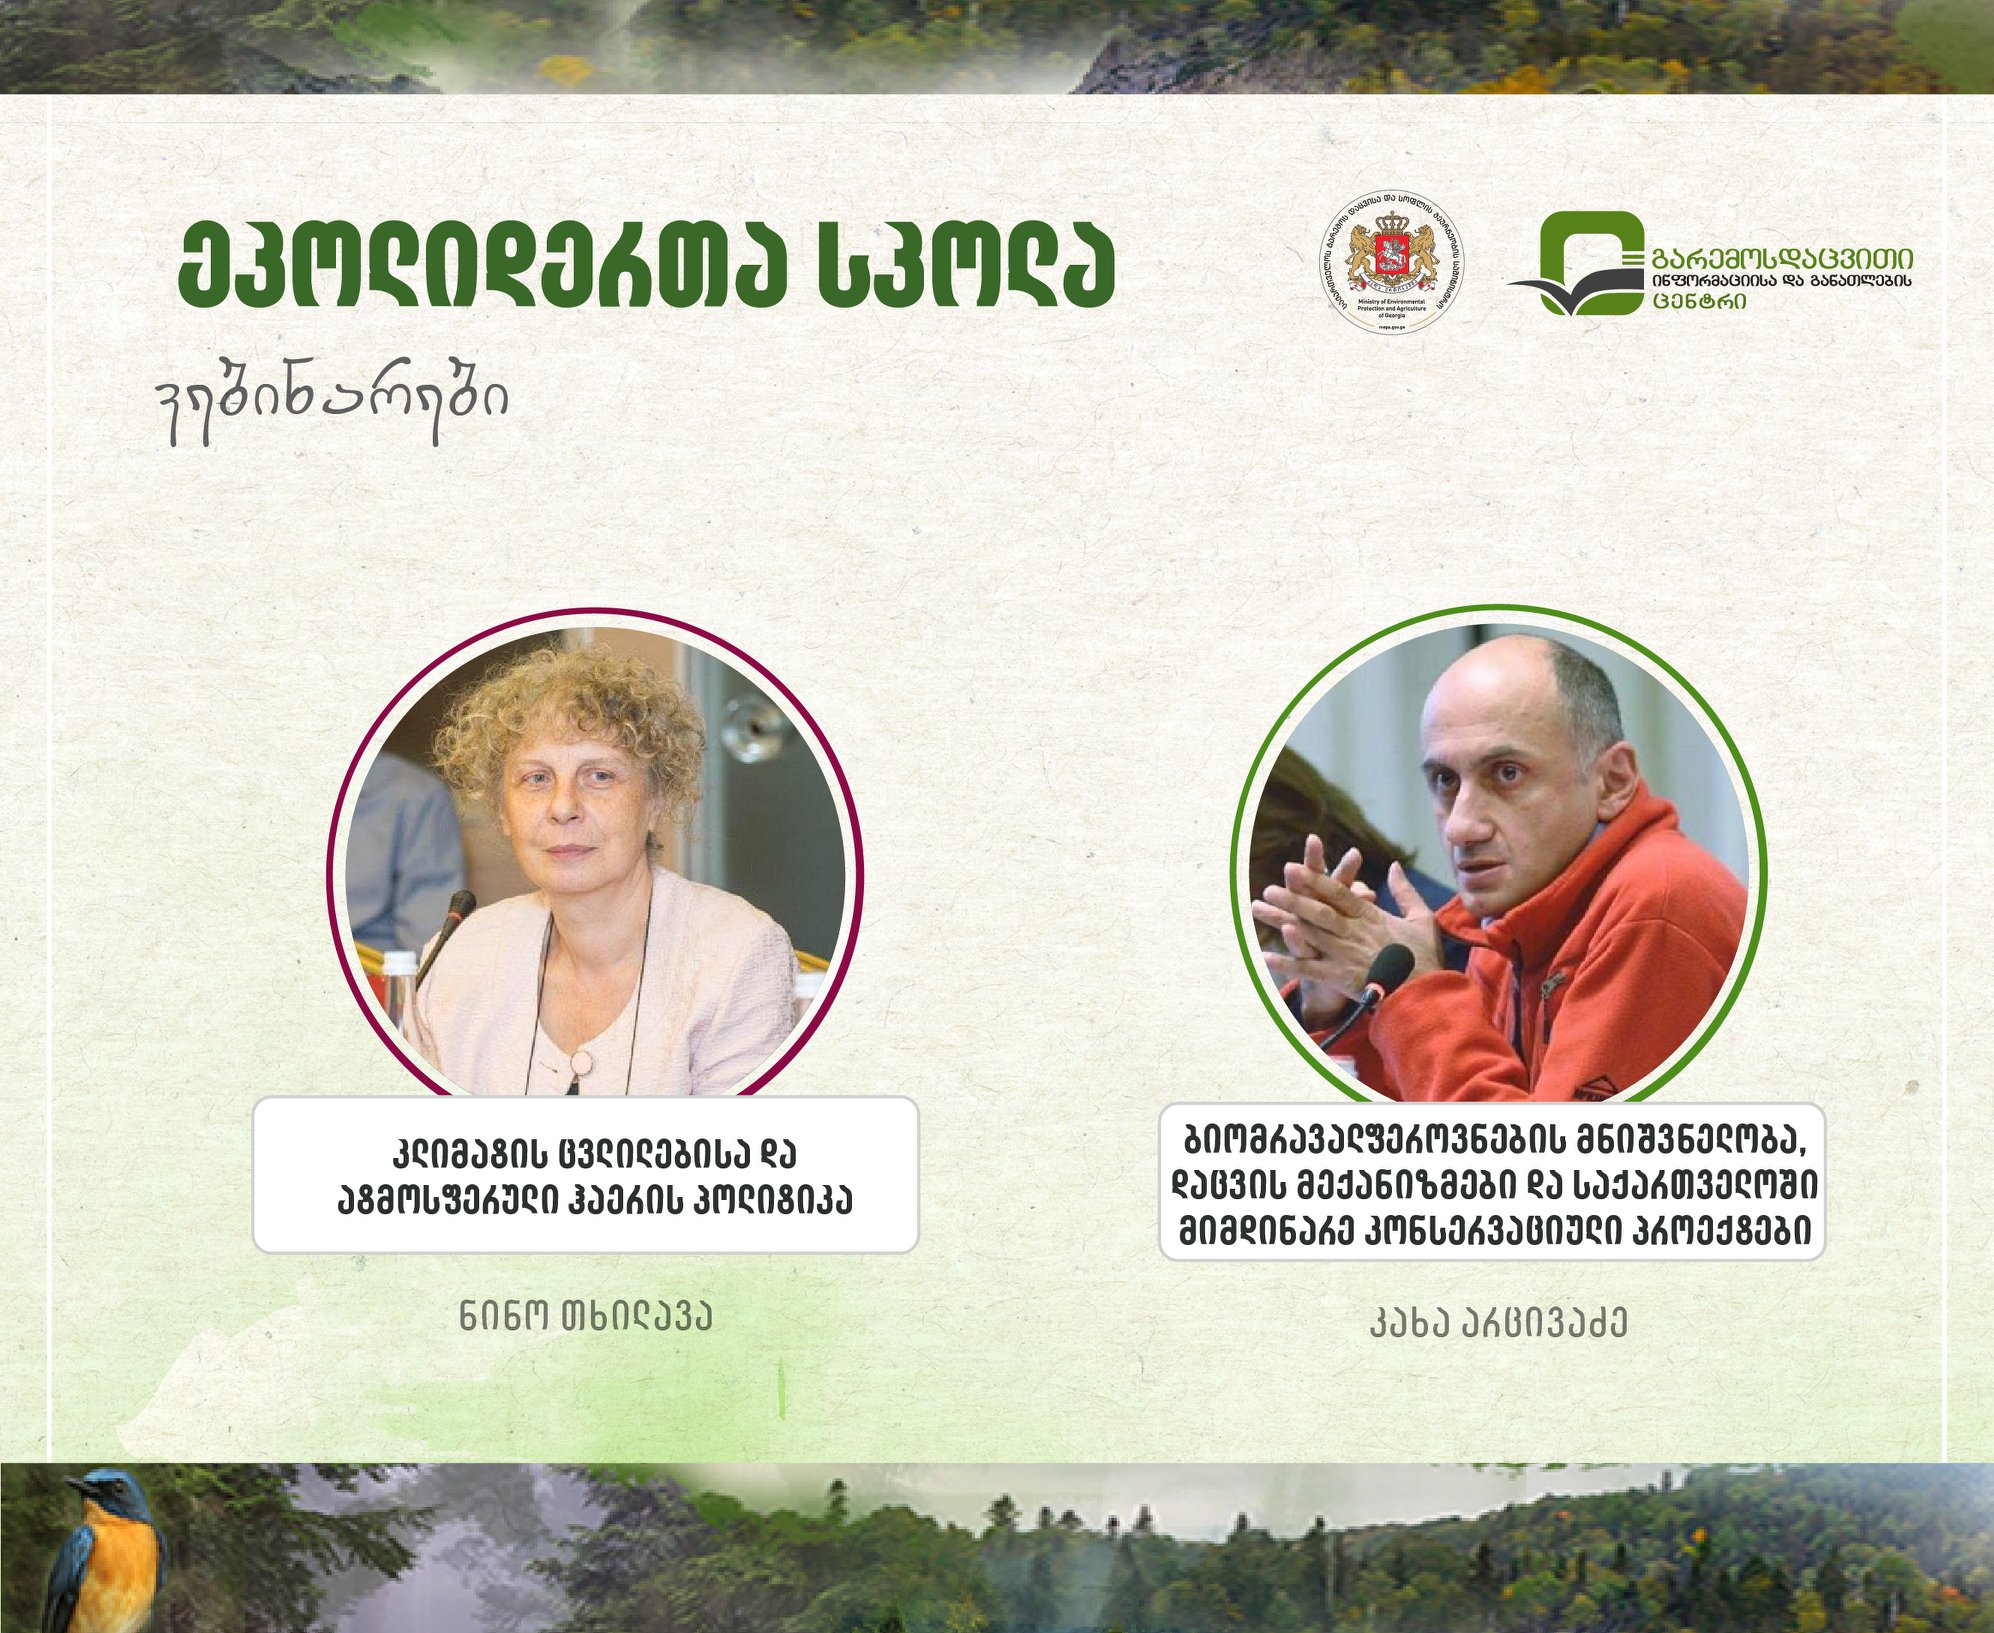 Teaching process in the School of Eco-leaders is conducted remotely